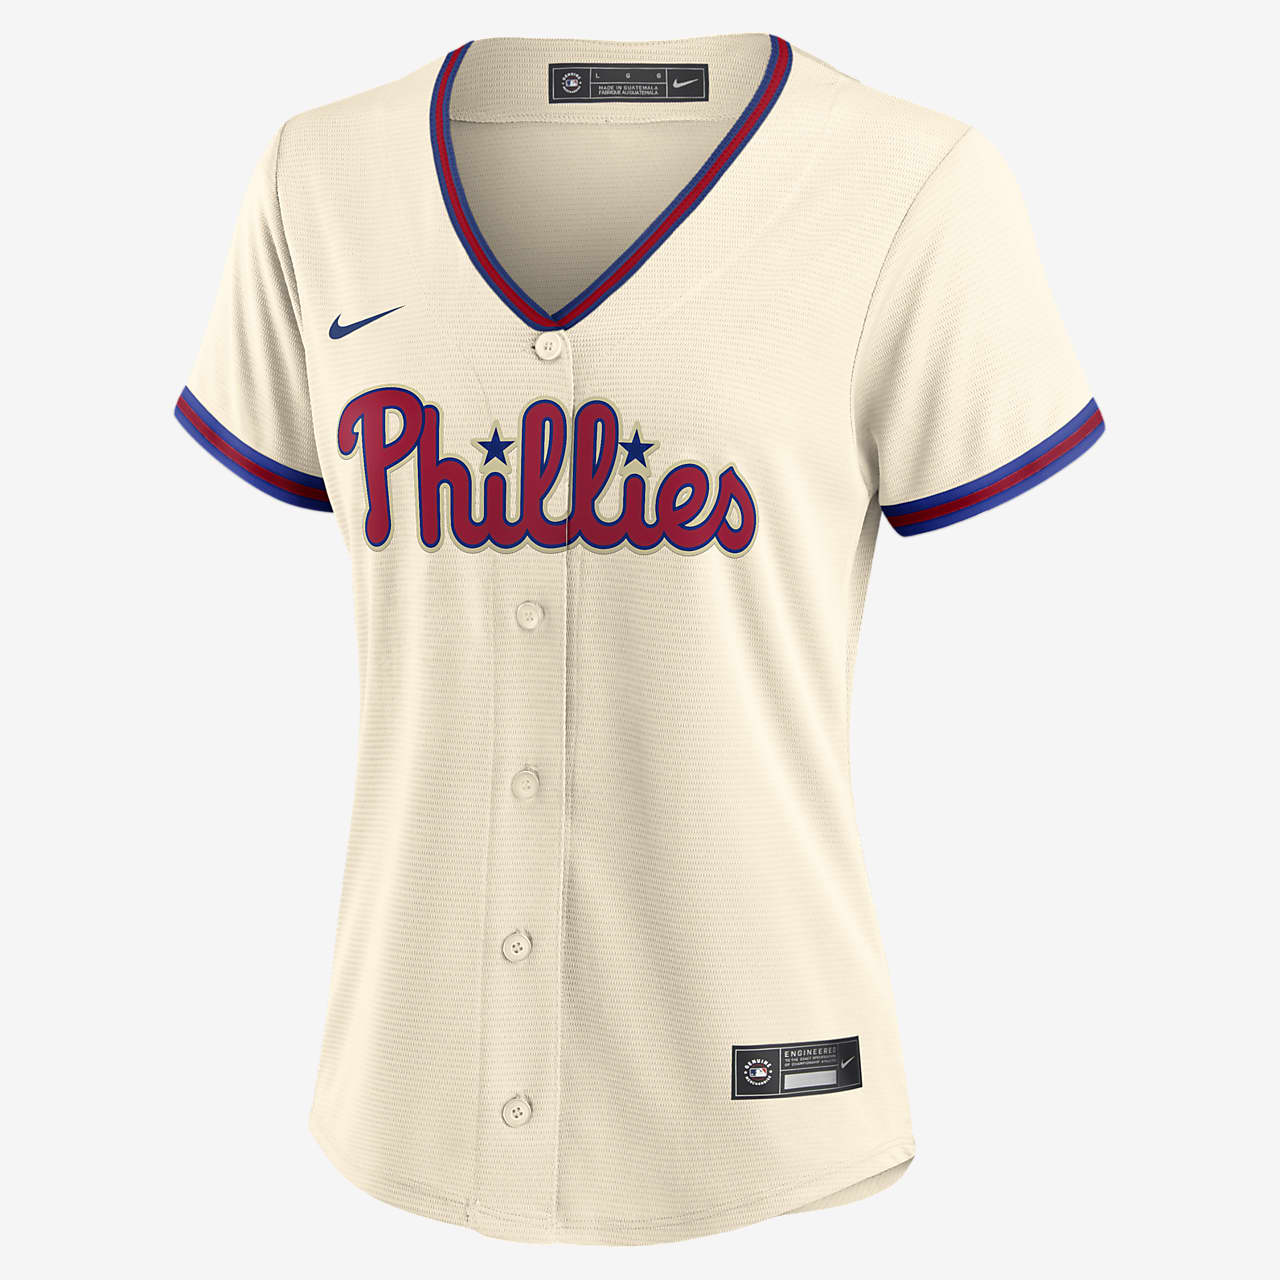 Patois outer phillies jersey youth custom Antipoison heritage